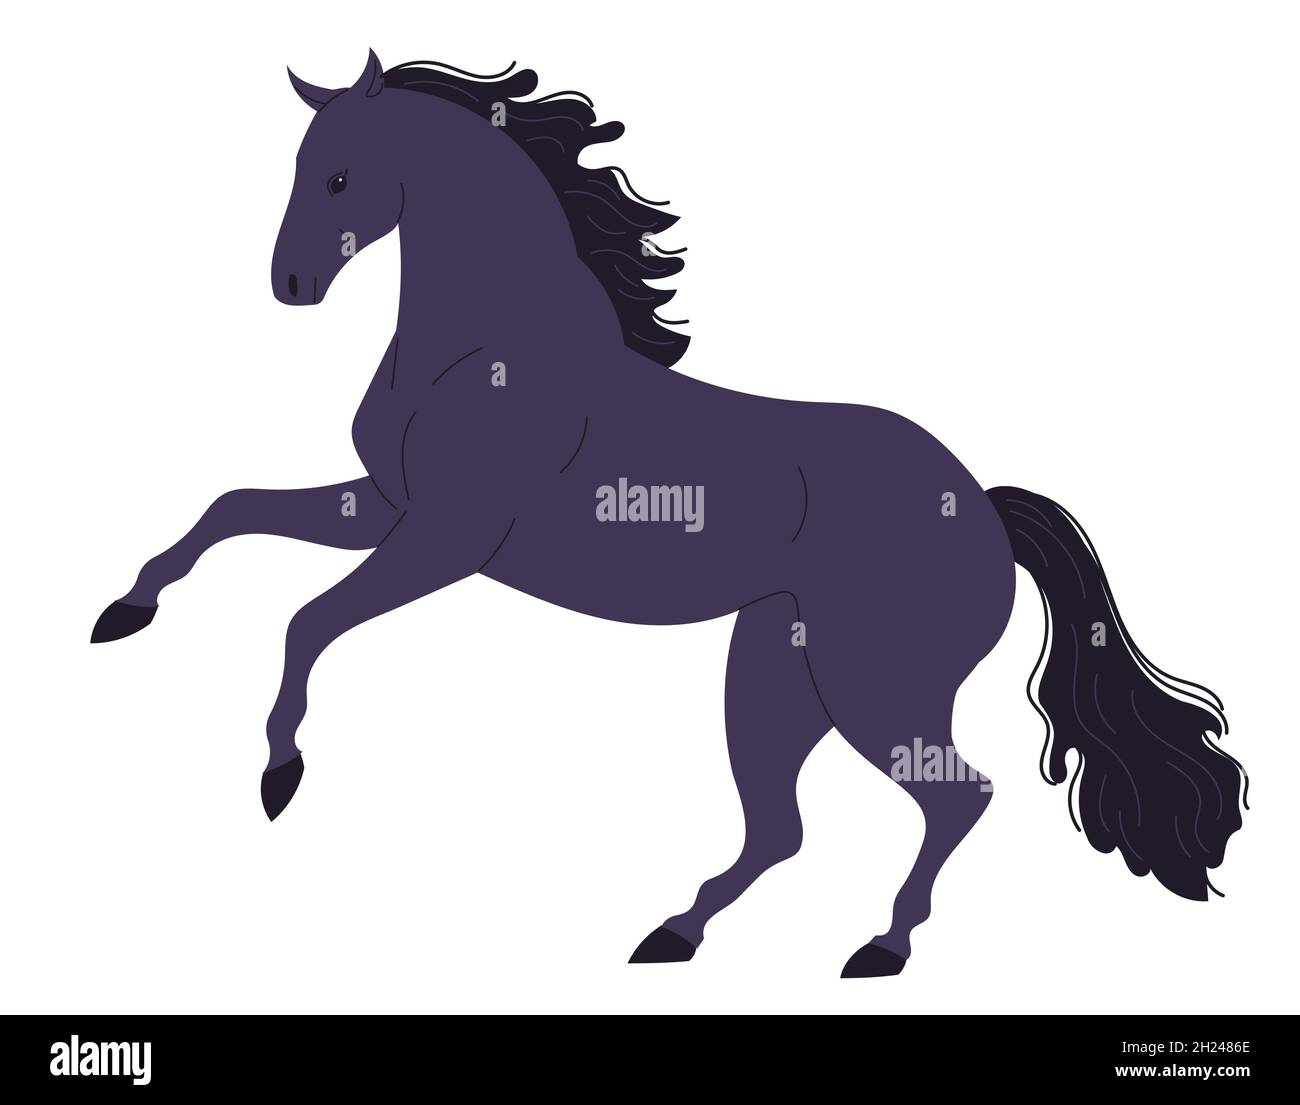 Dark energetic horse with its front hooves raised on its hind legs. Stock Vector